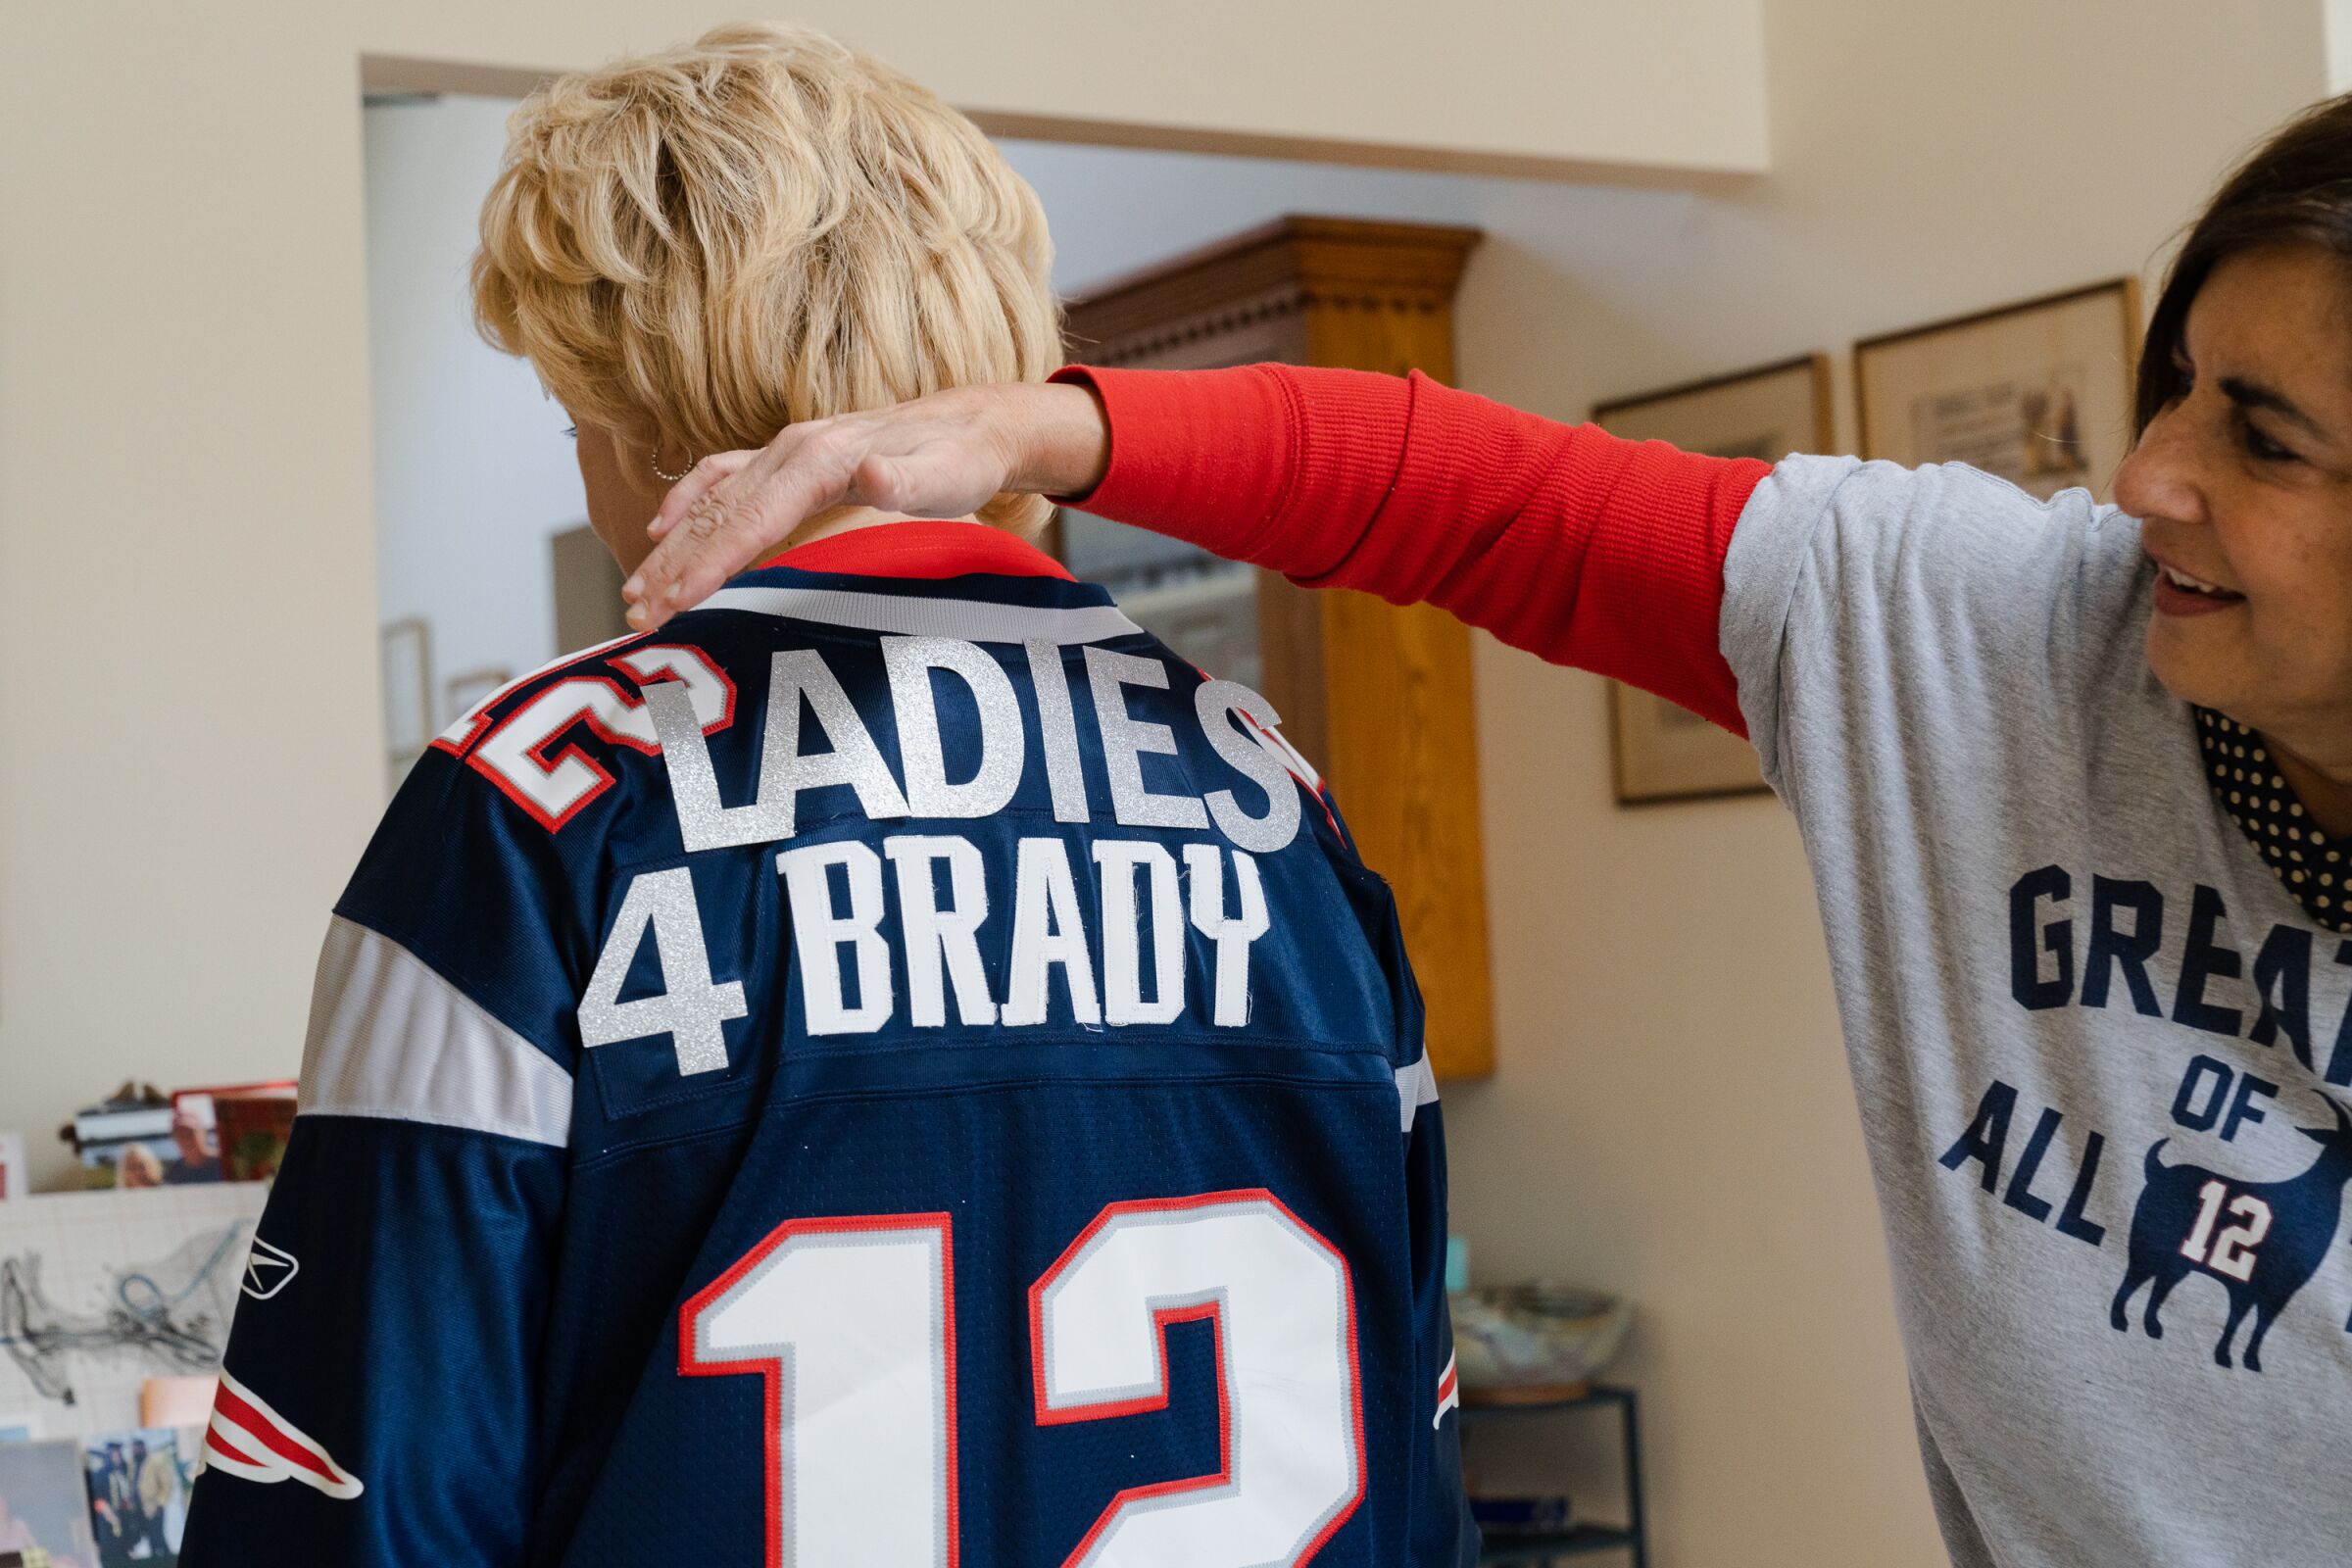 A woman adjusts another woman's jersey with the custom letters 'Ladies 4 Brady'